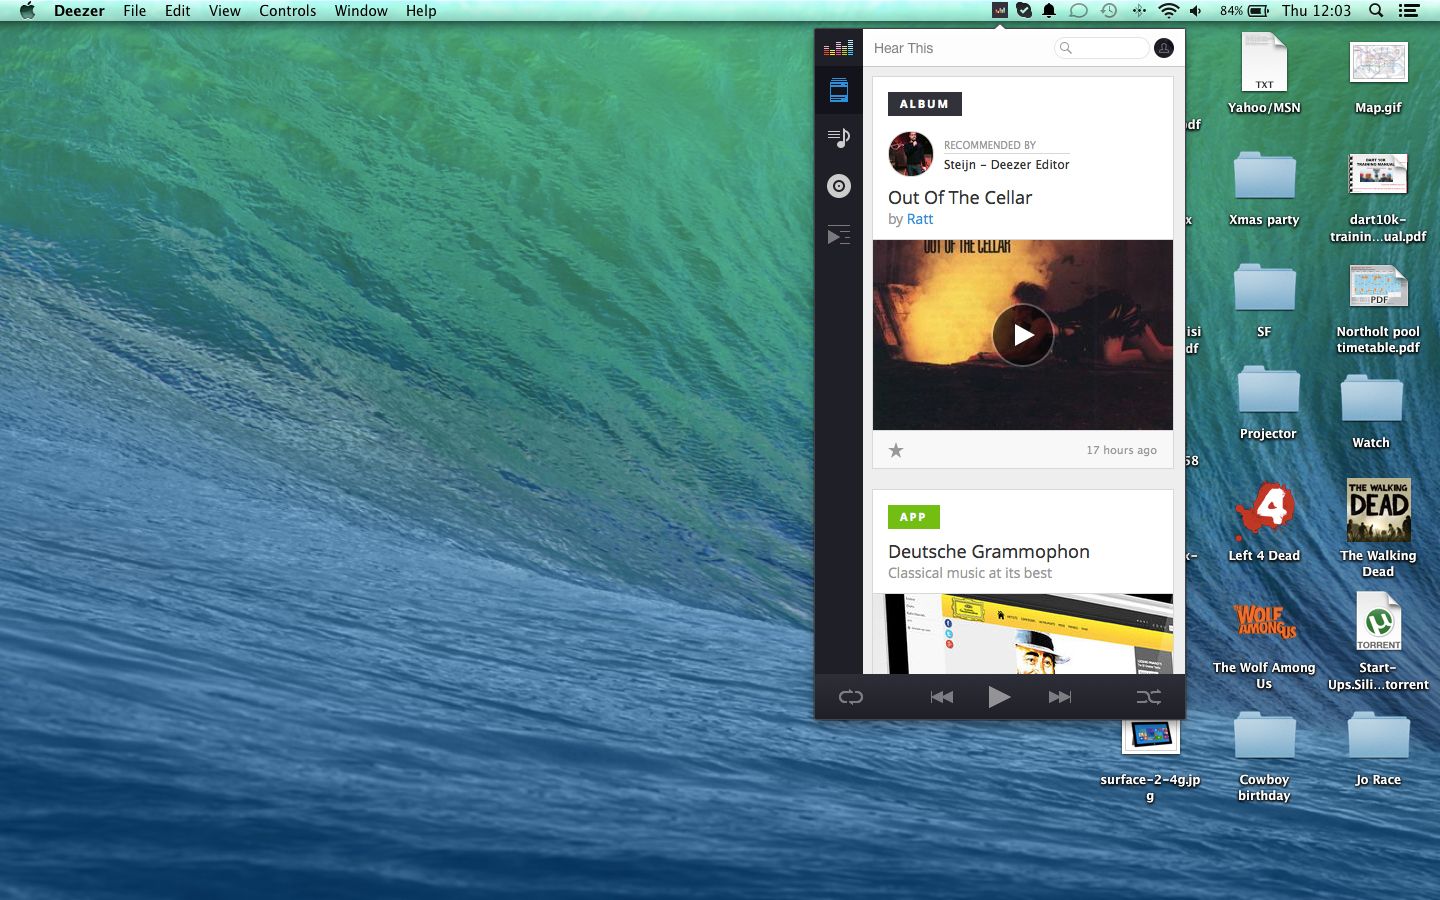 deezer update brings free radio on mobiles mac beta and integration of local files image 1